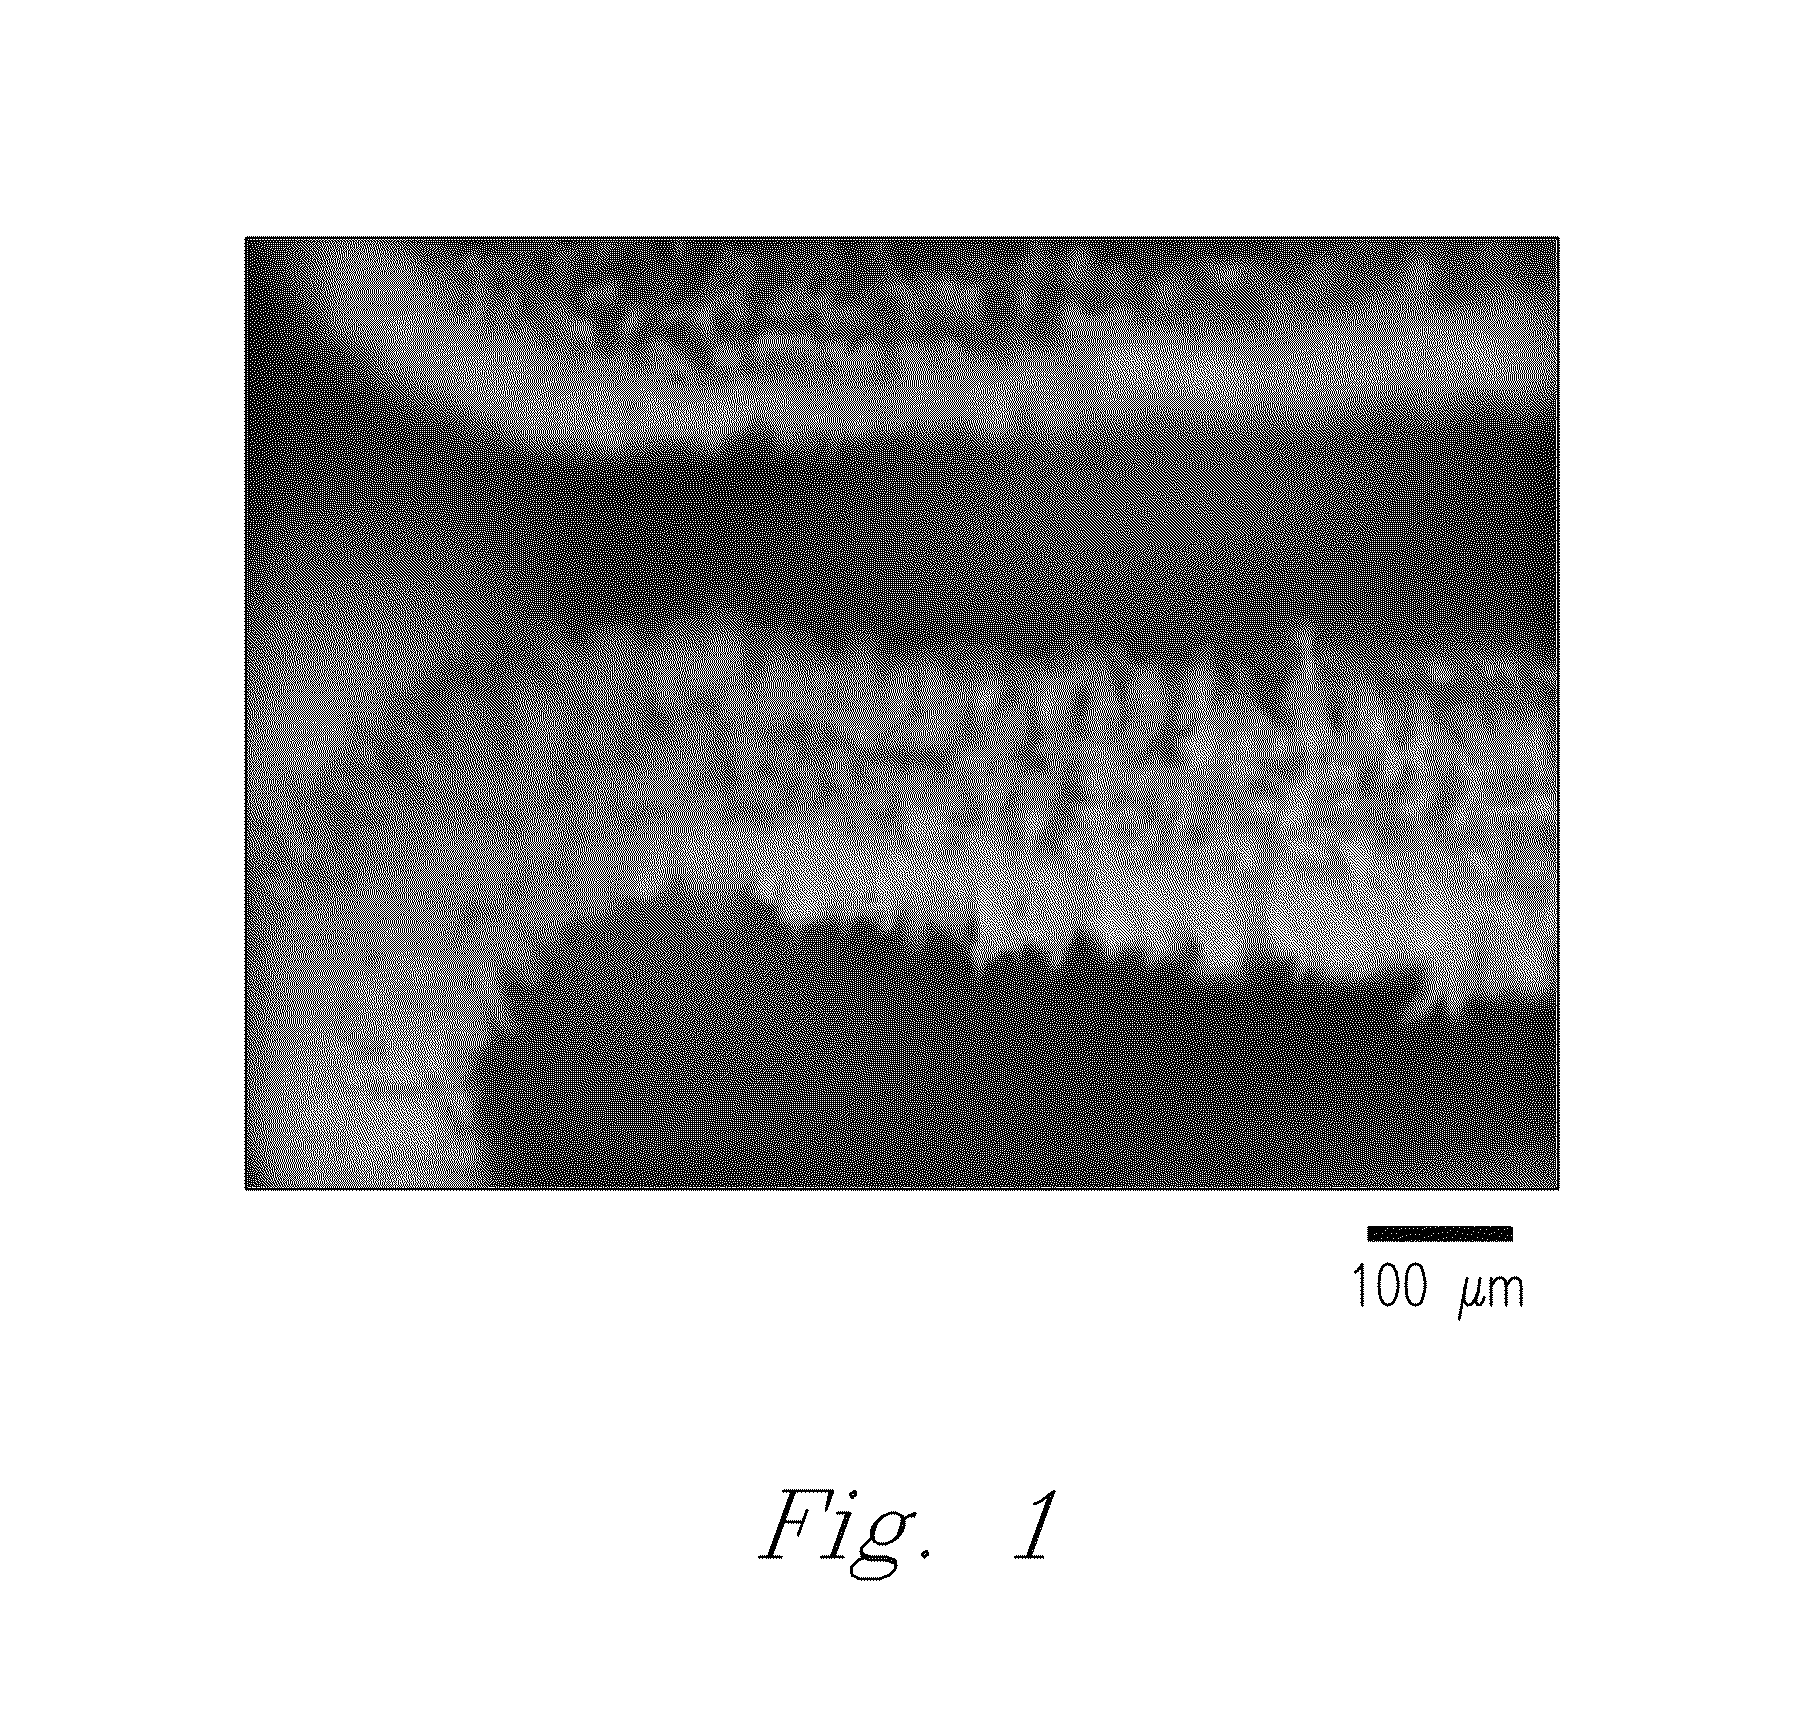 System and method for enhanced electrostatic deposition and surface coatings